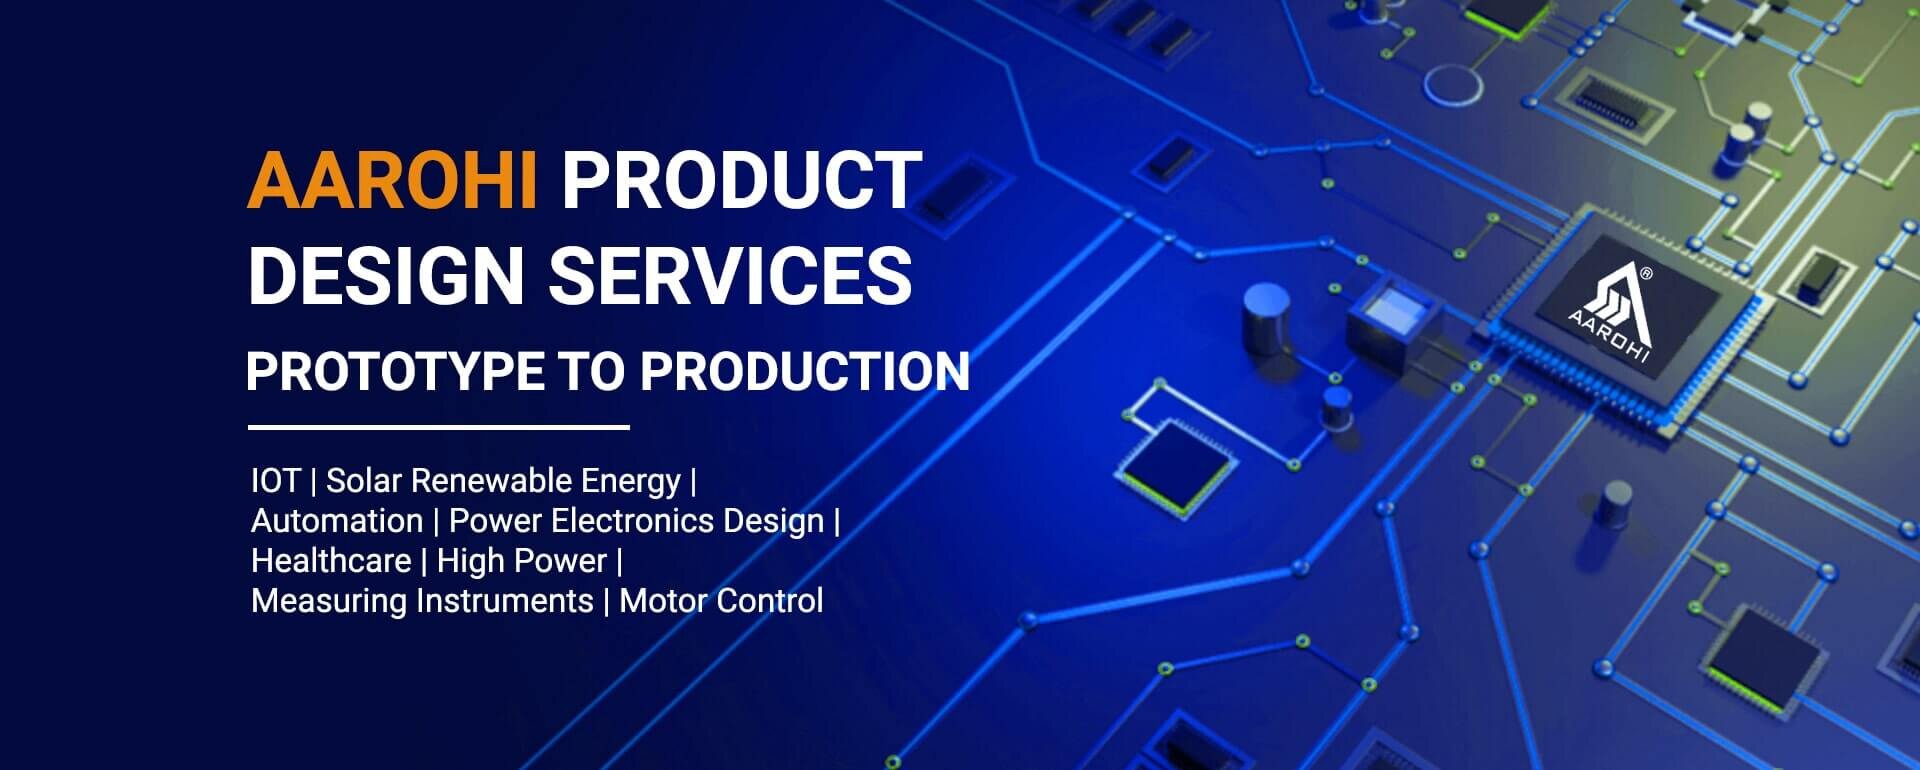 Aarohi Product-Design-Services